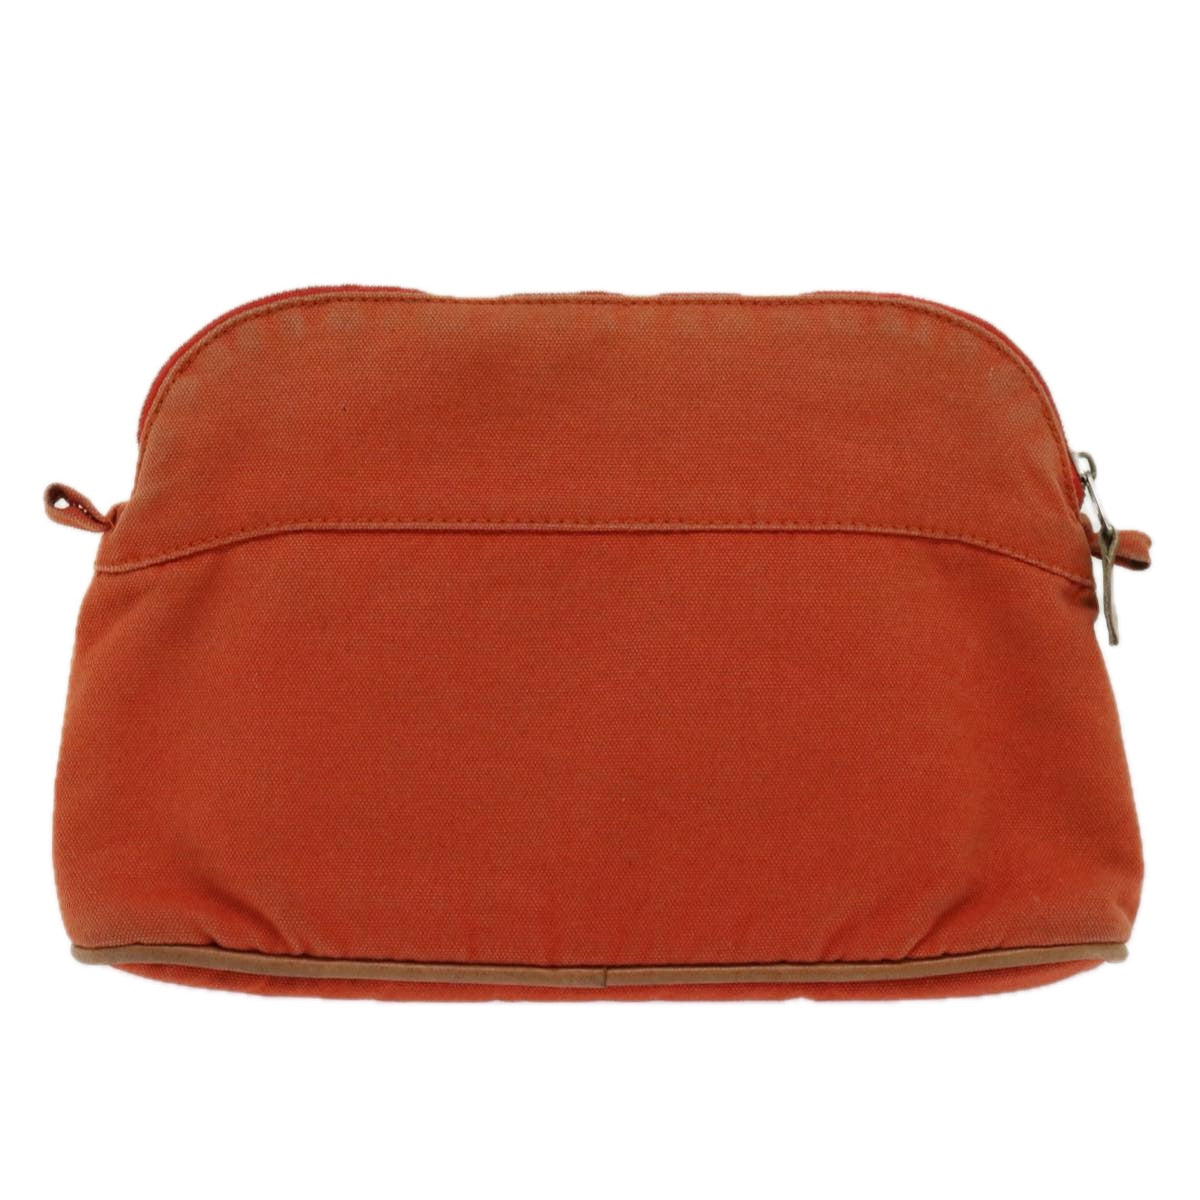 HERMES Bolide Pouch Canvas Orange Auth 62680 - 0